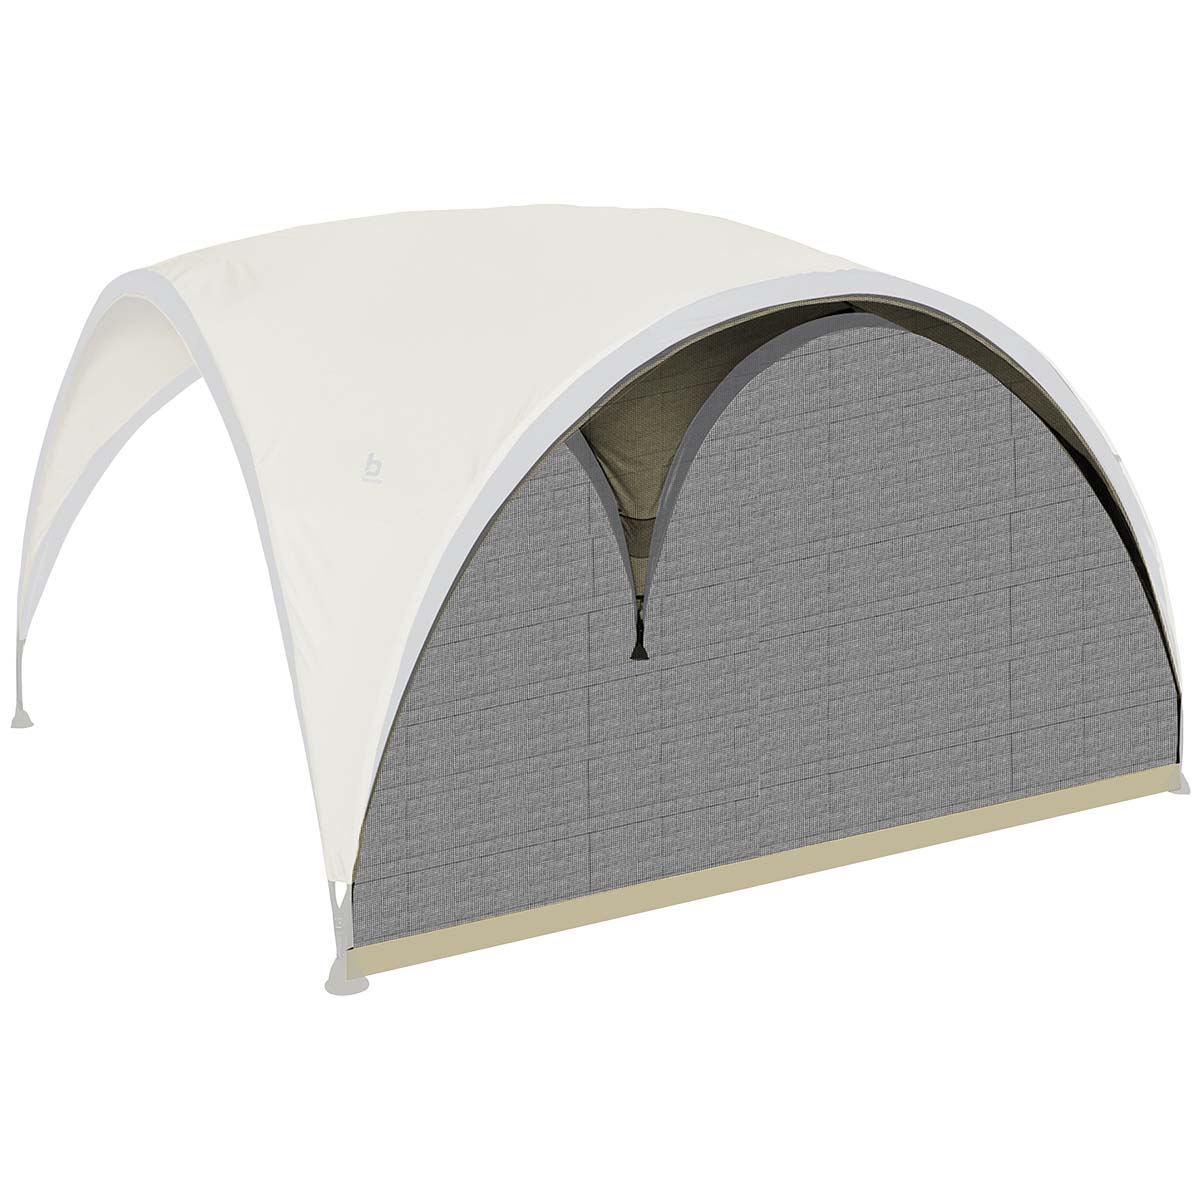 4472215 Bo-Camp - Sidewall - Party Shelter - Polyester - Large - With netting sidewall